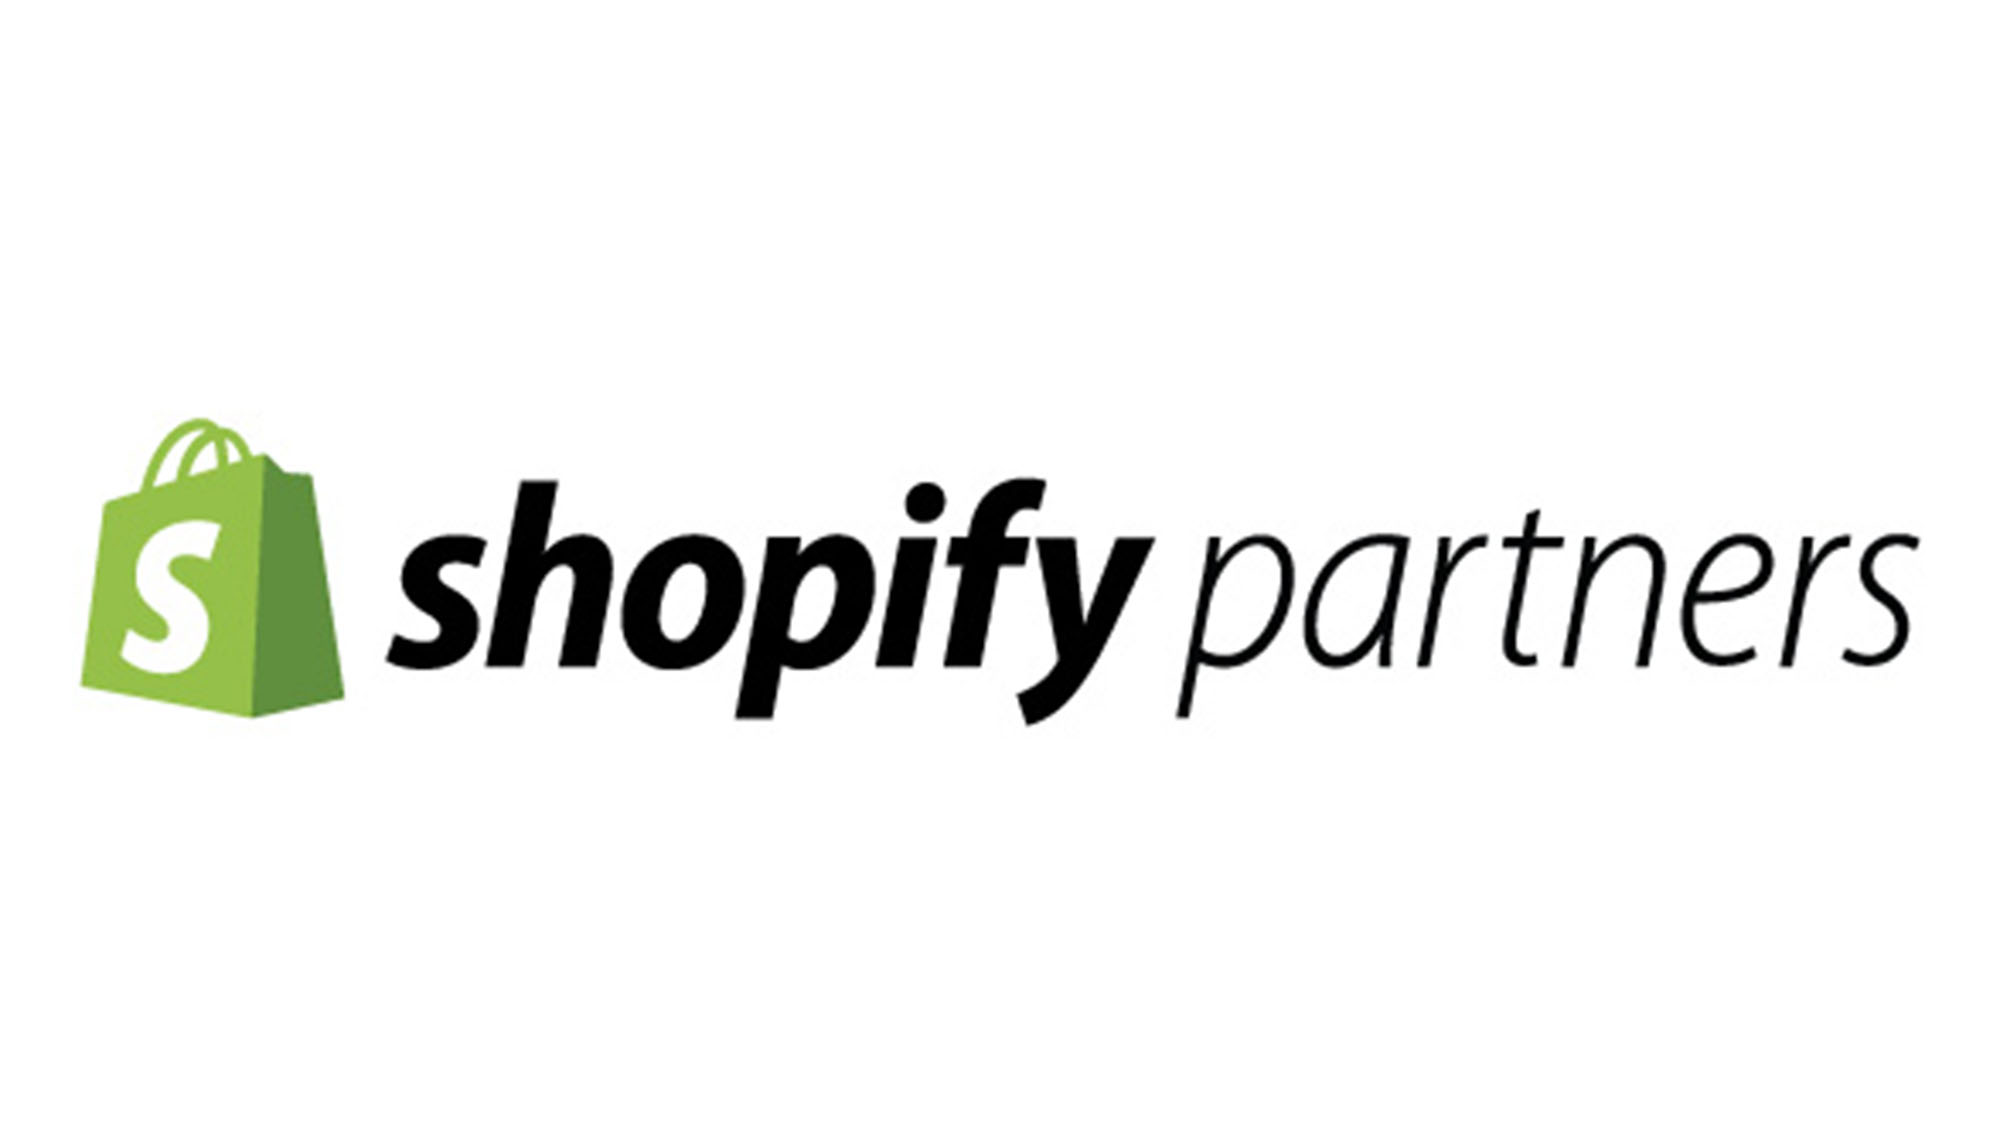 facebook advertising ecommerce shopify partners